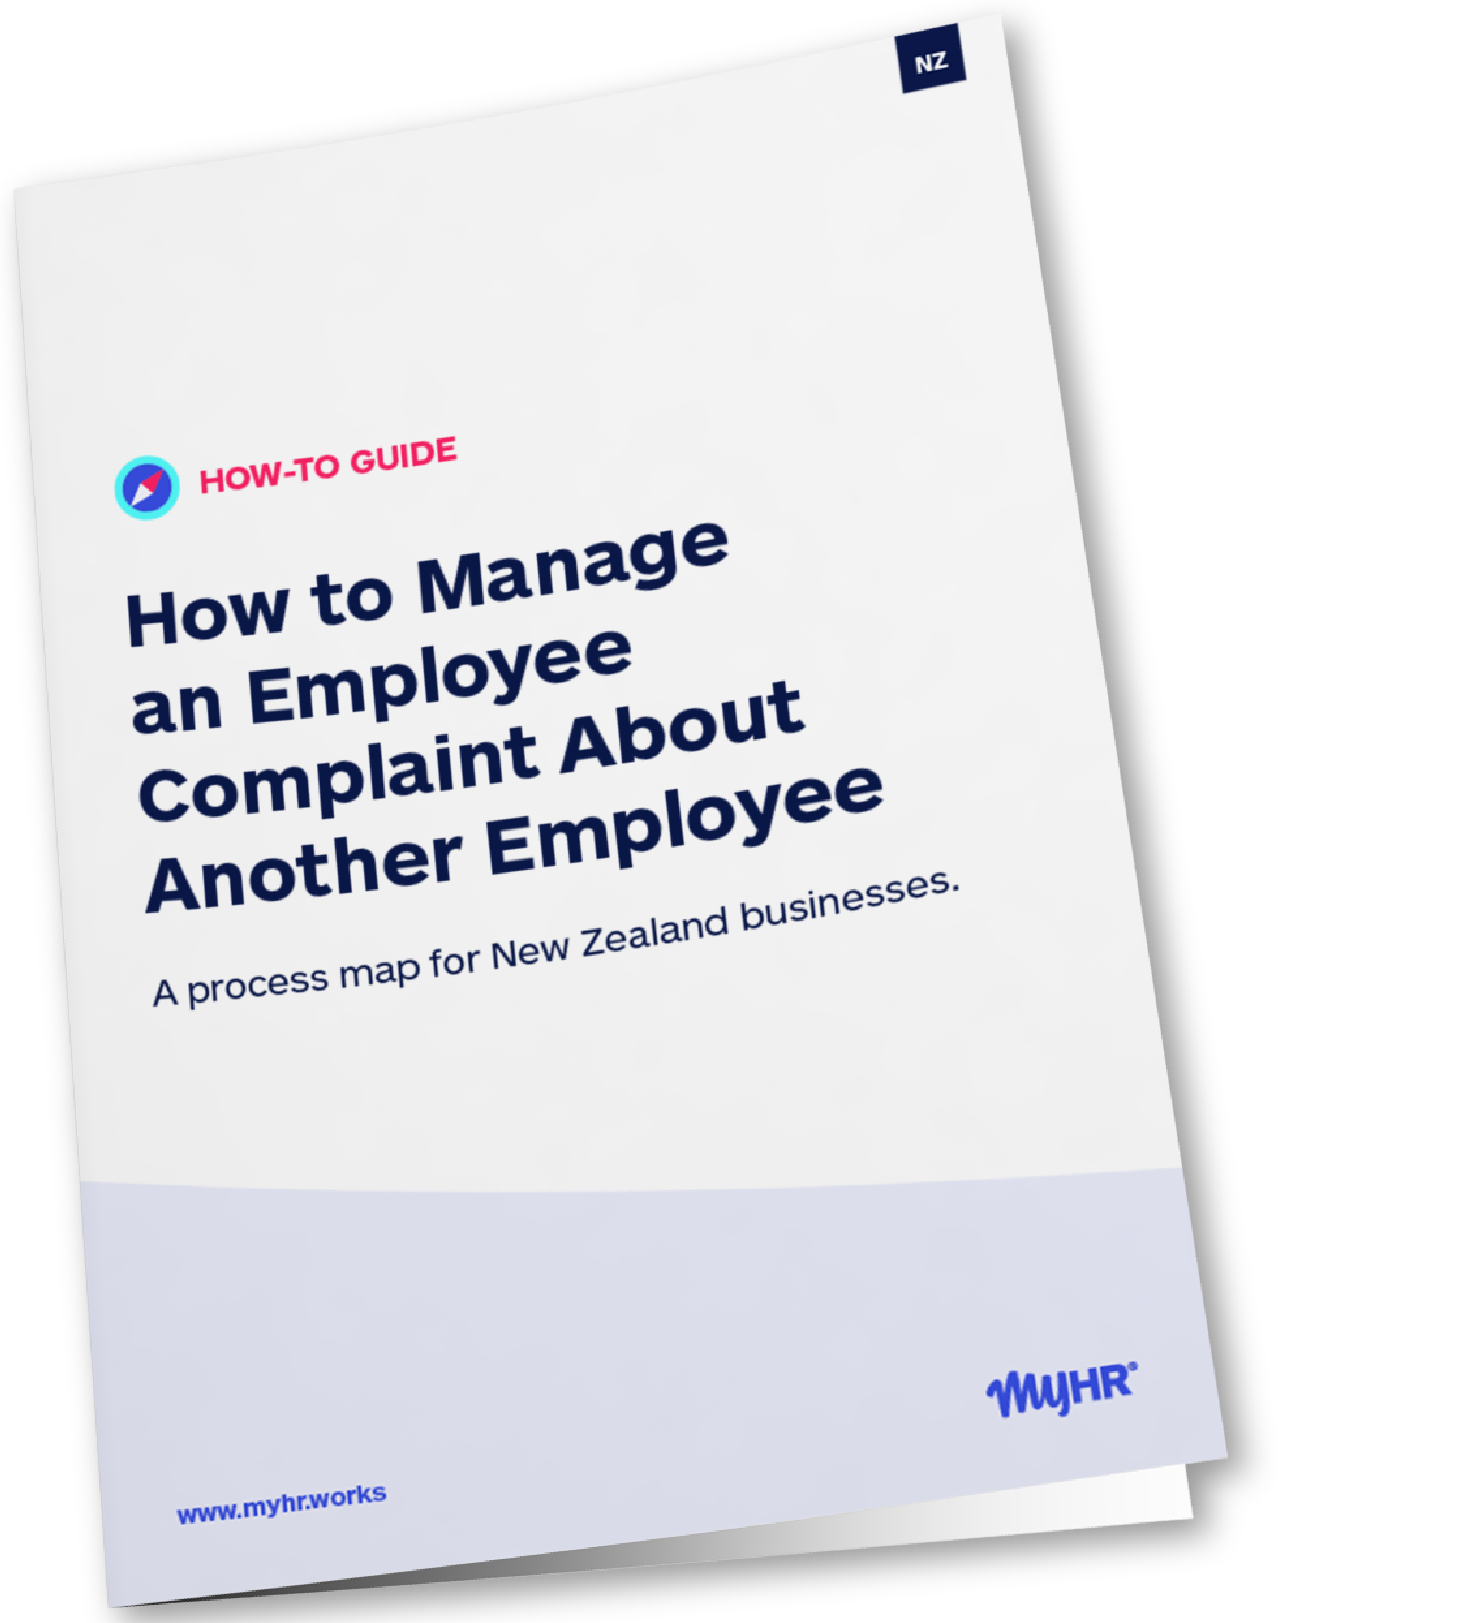 MyHR_NZ How to Manage an Employee Complaint About Another Employee Mockup